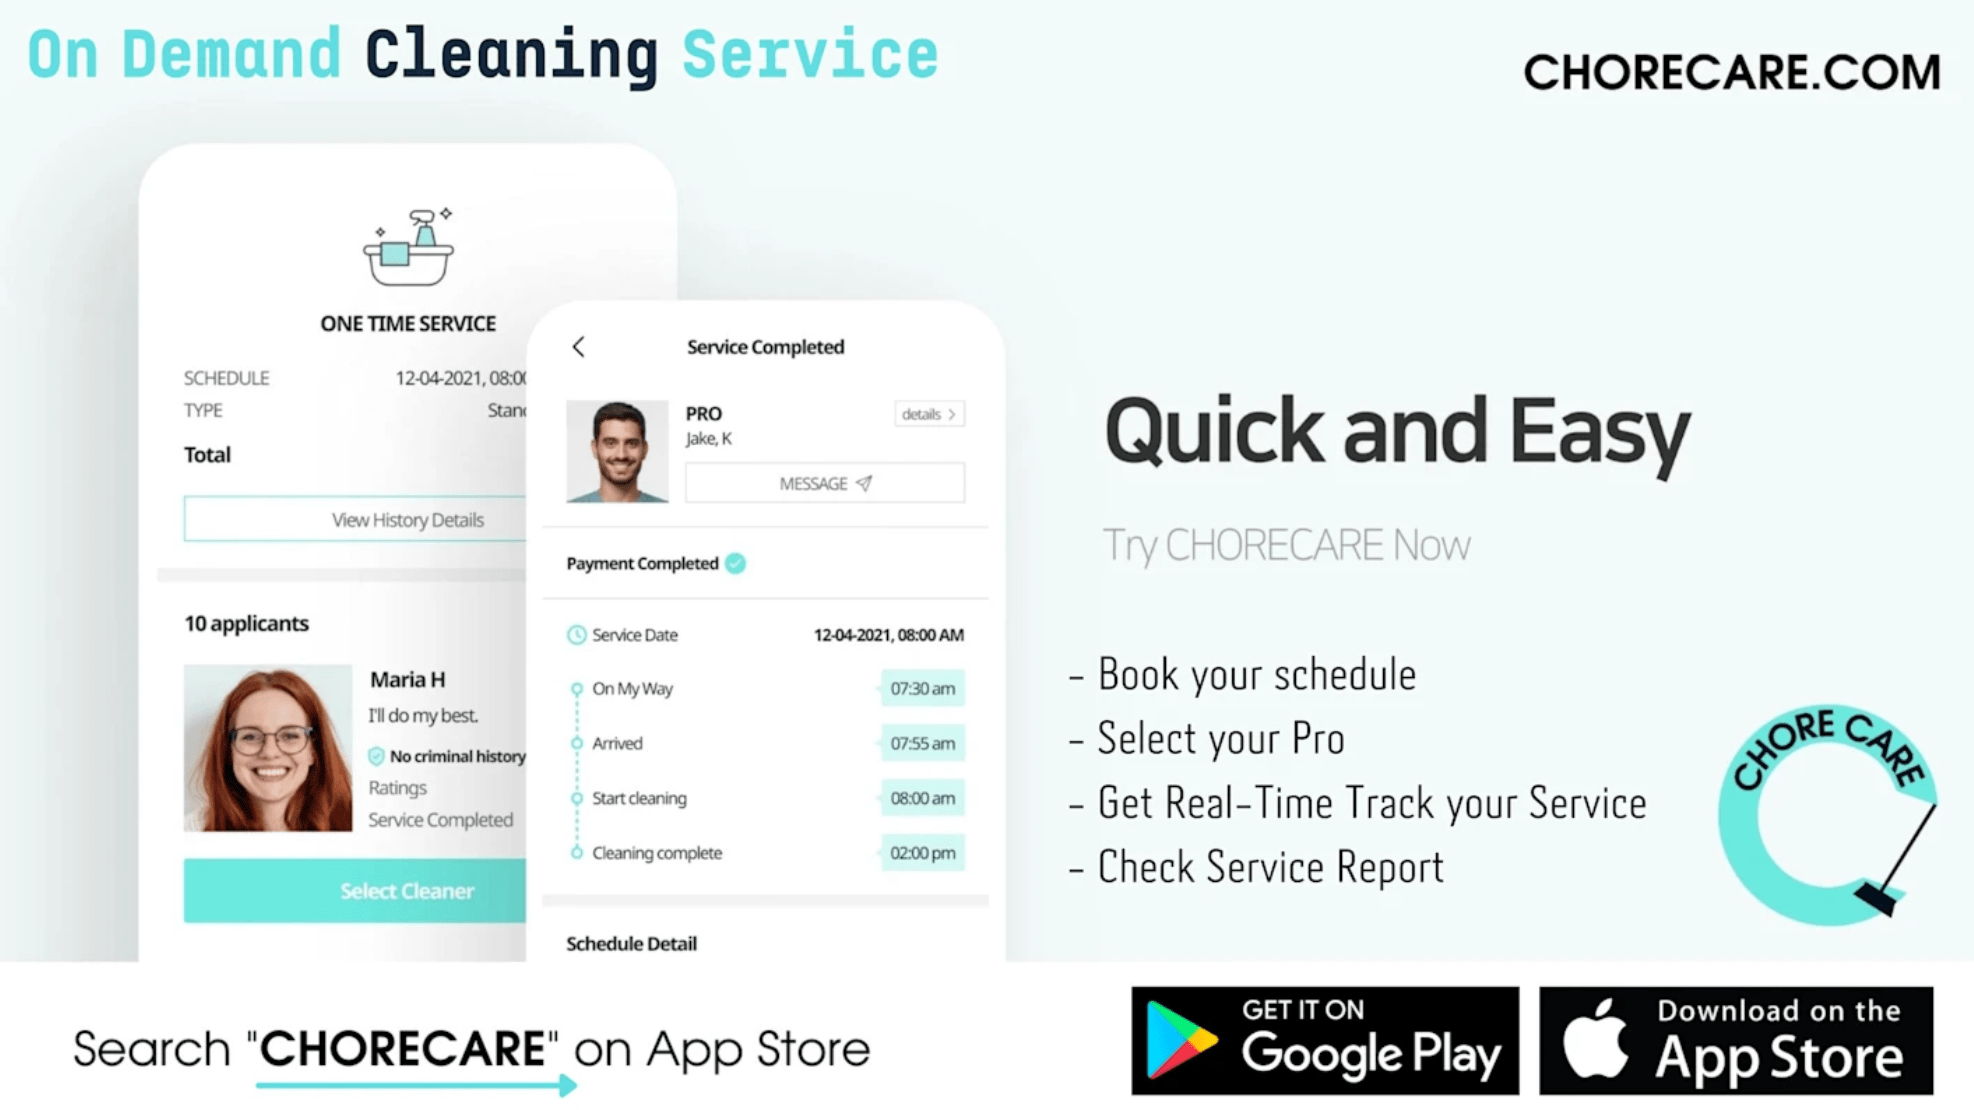 Chore Care Challenges The Status Quo With Their Online On-Demand Cleaning Services 6